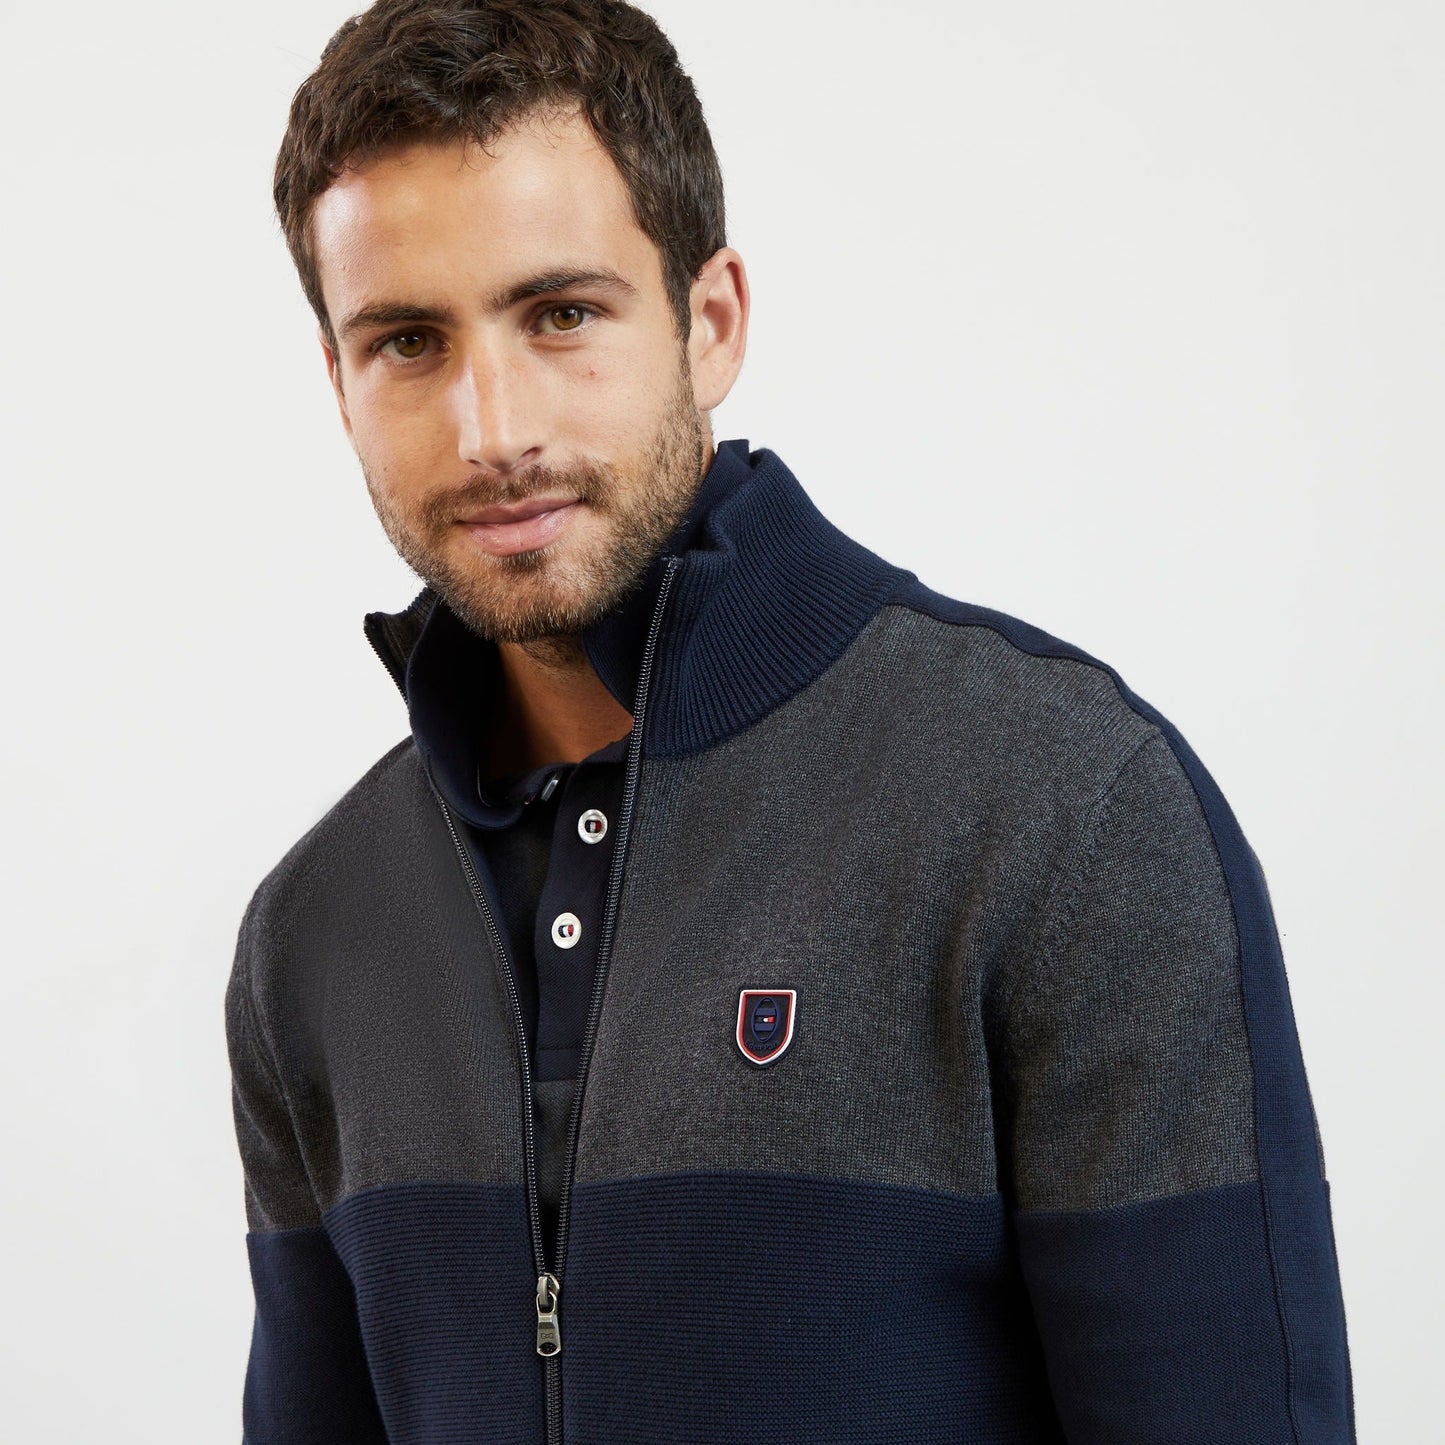 Eden Park Cable Knit Cardigan - Navy and Grey